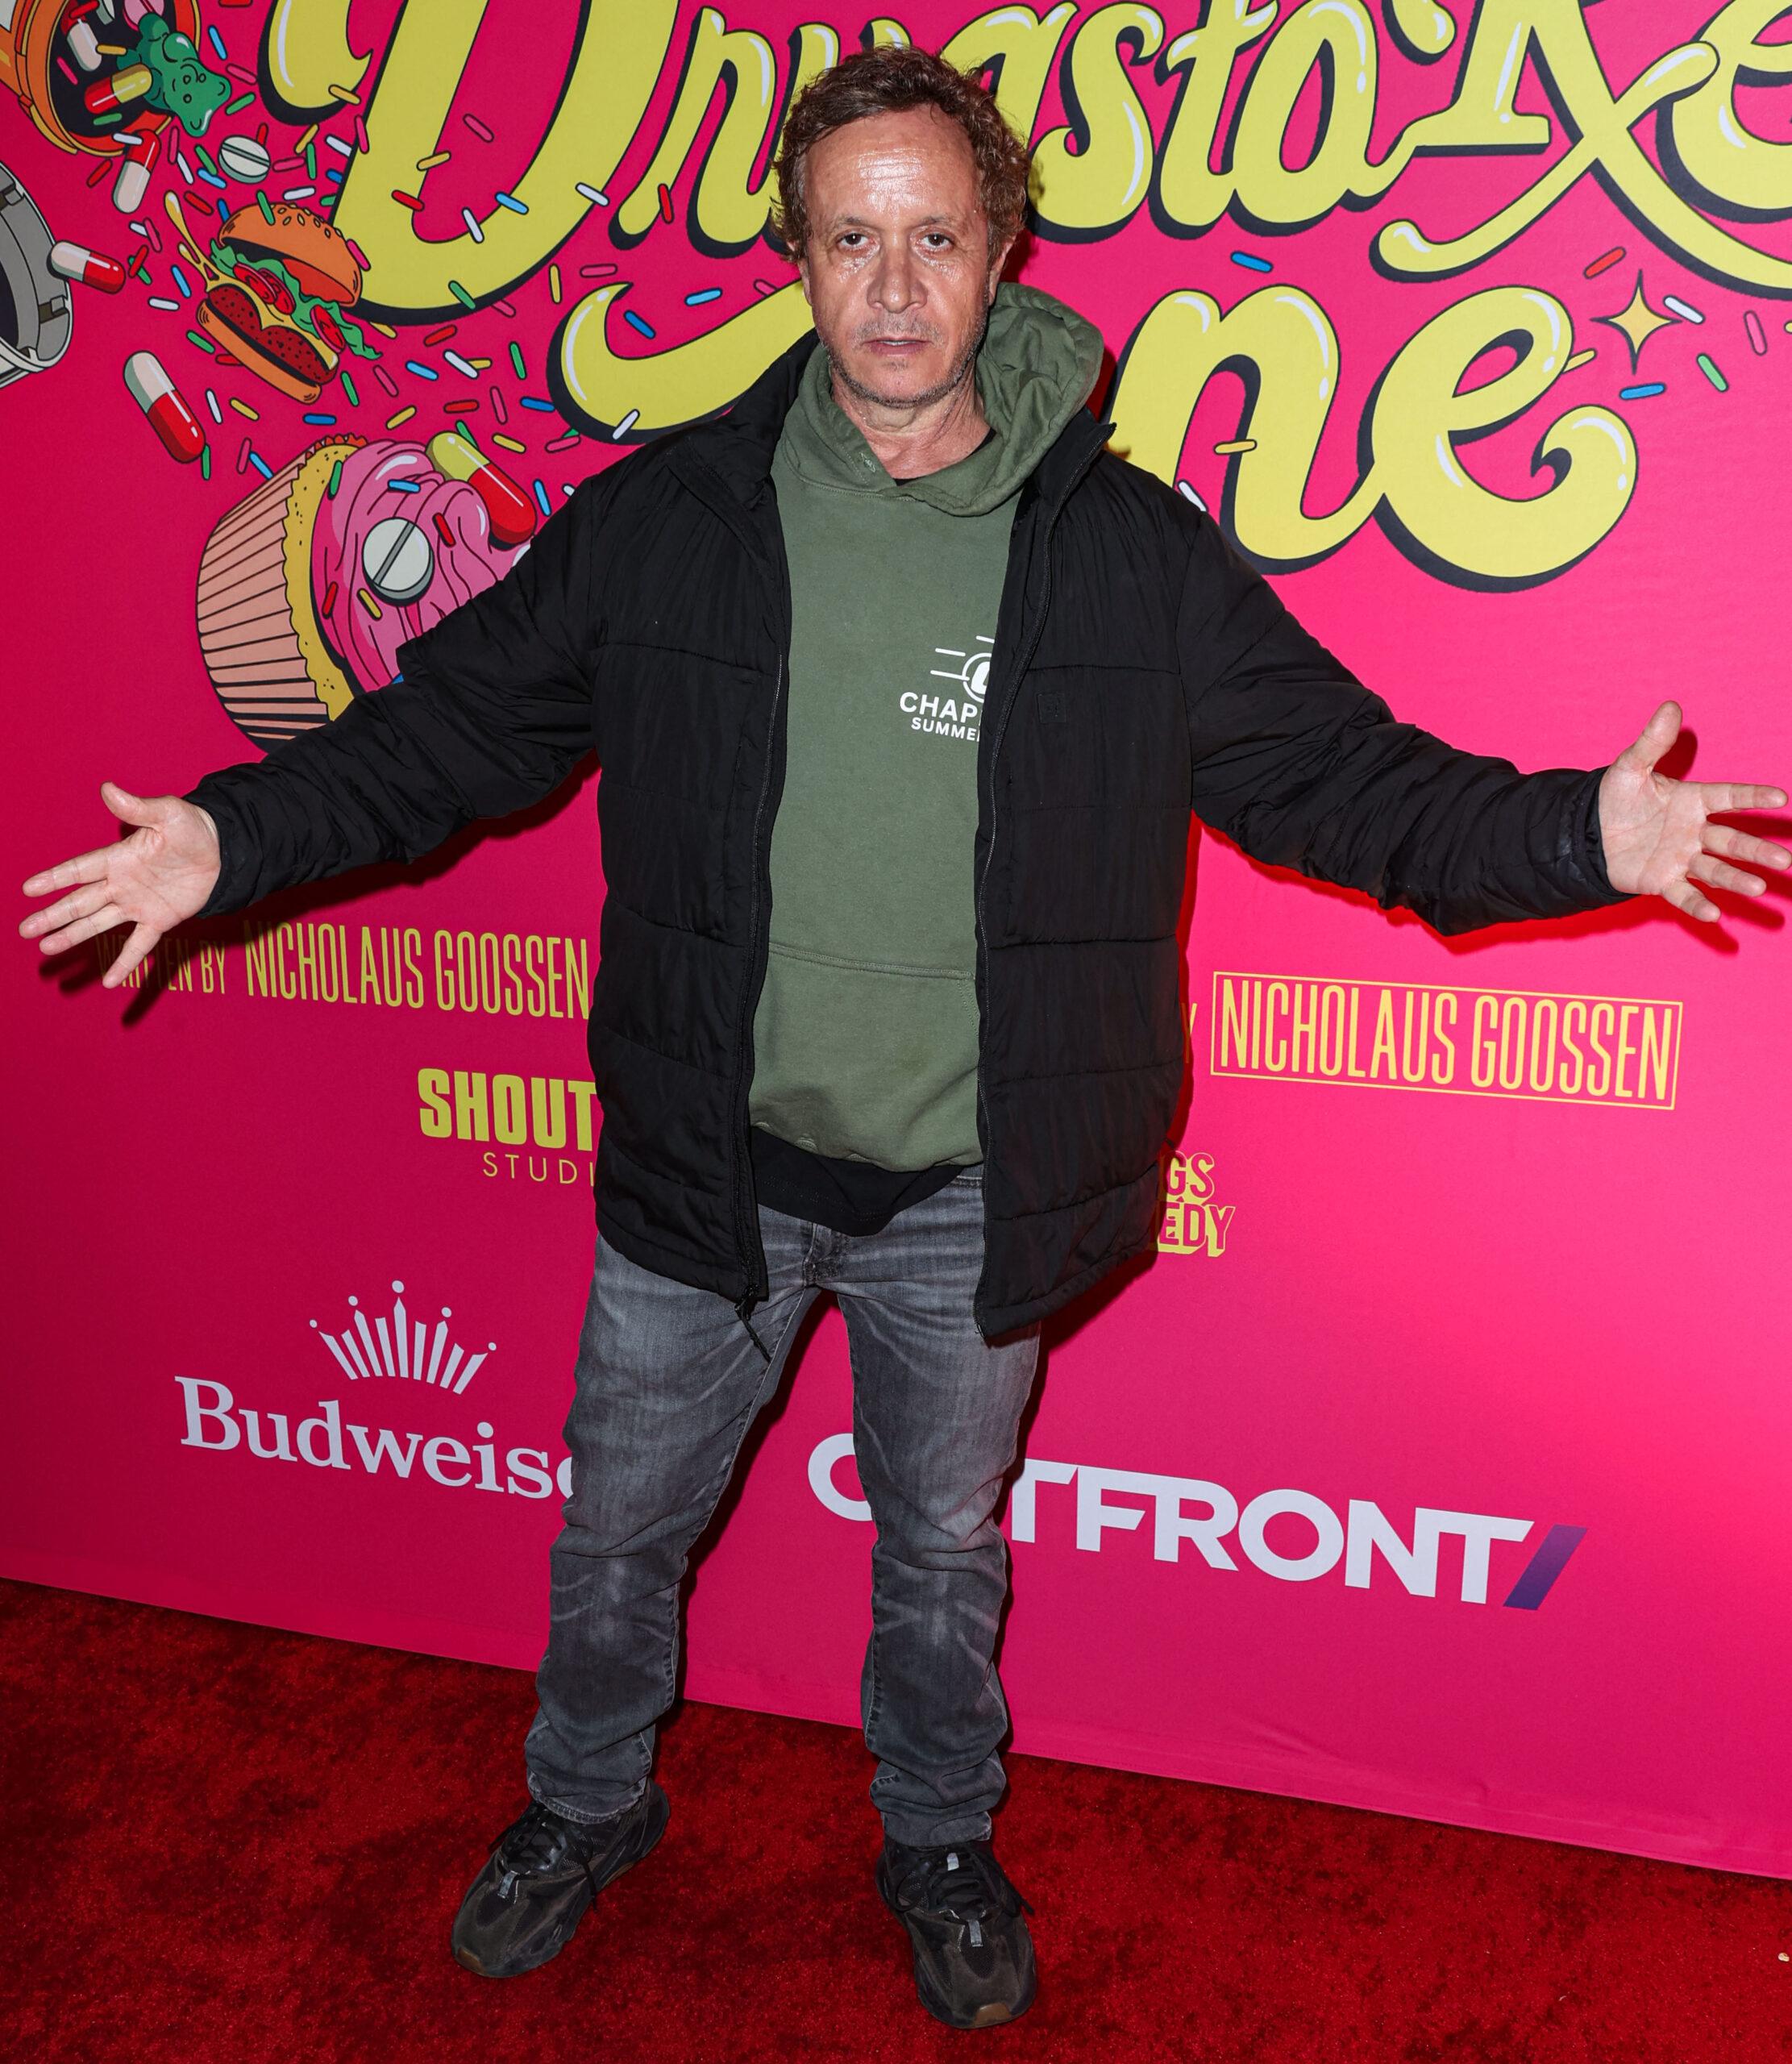 Pauly Shore poses on red carpet at film premiere.